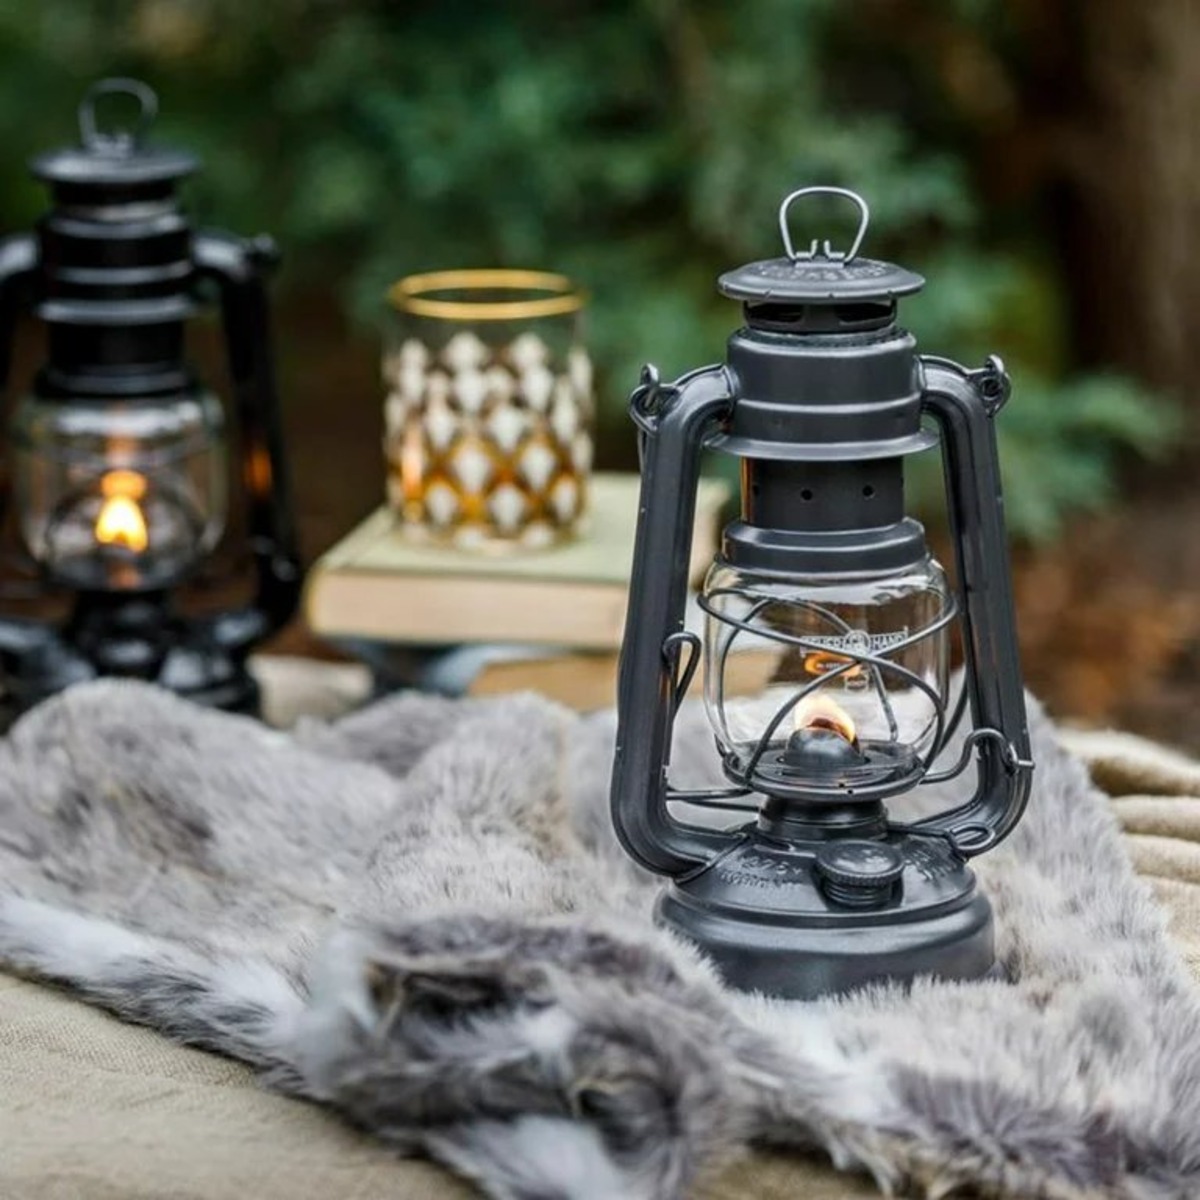 What Is A Hurricane Lamp